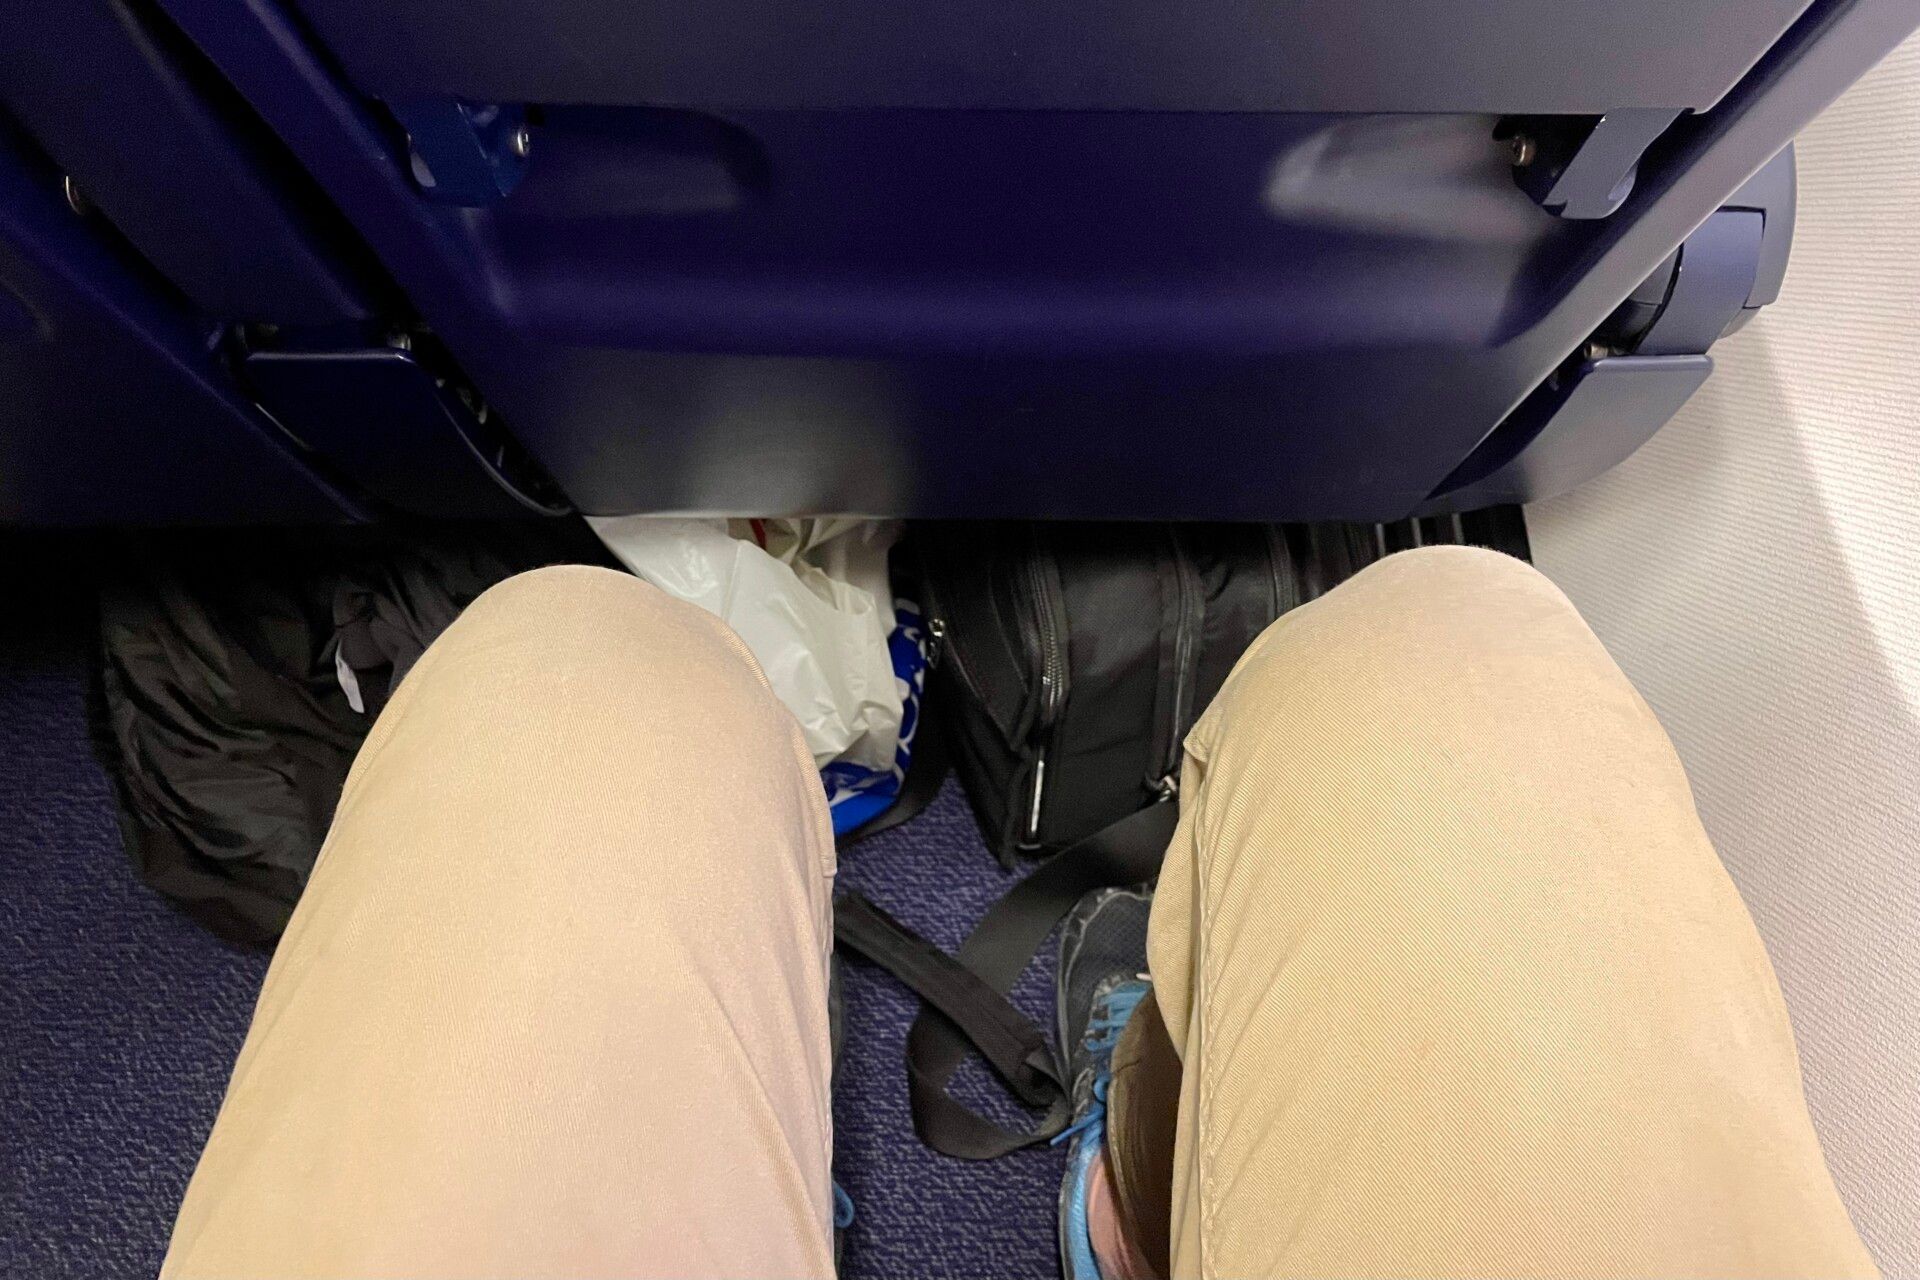 A photo inside the Ryanair aircraft cabin, showing seat pitch.